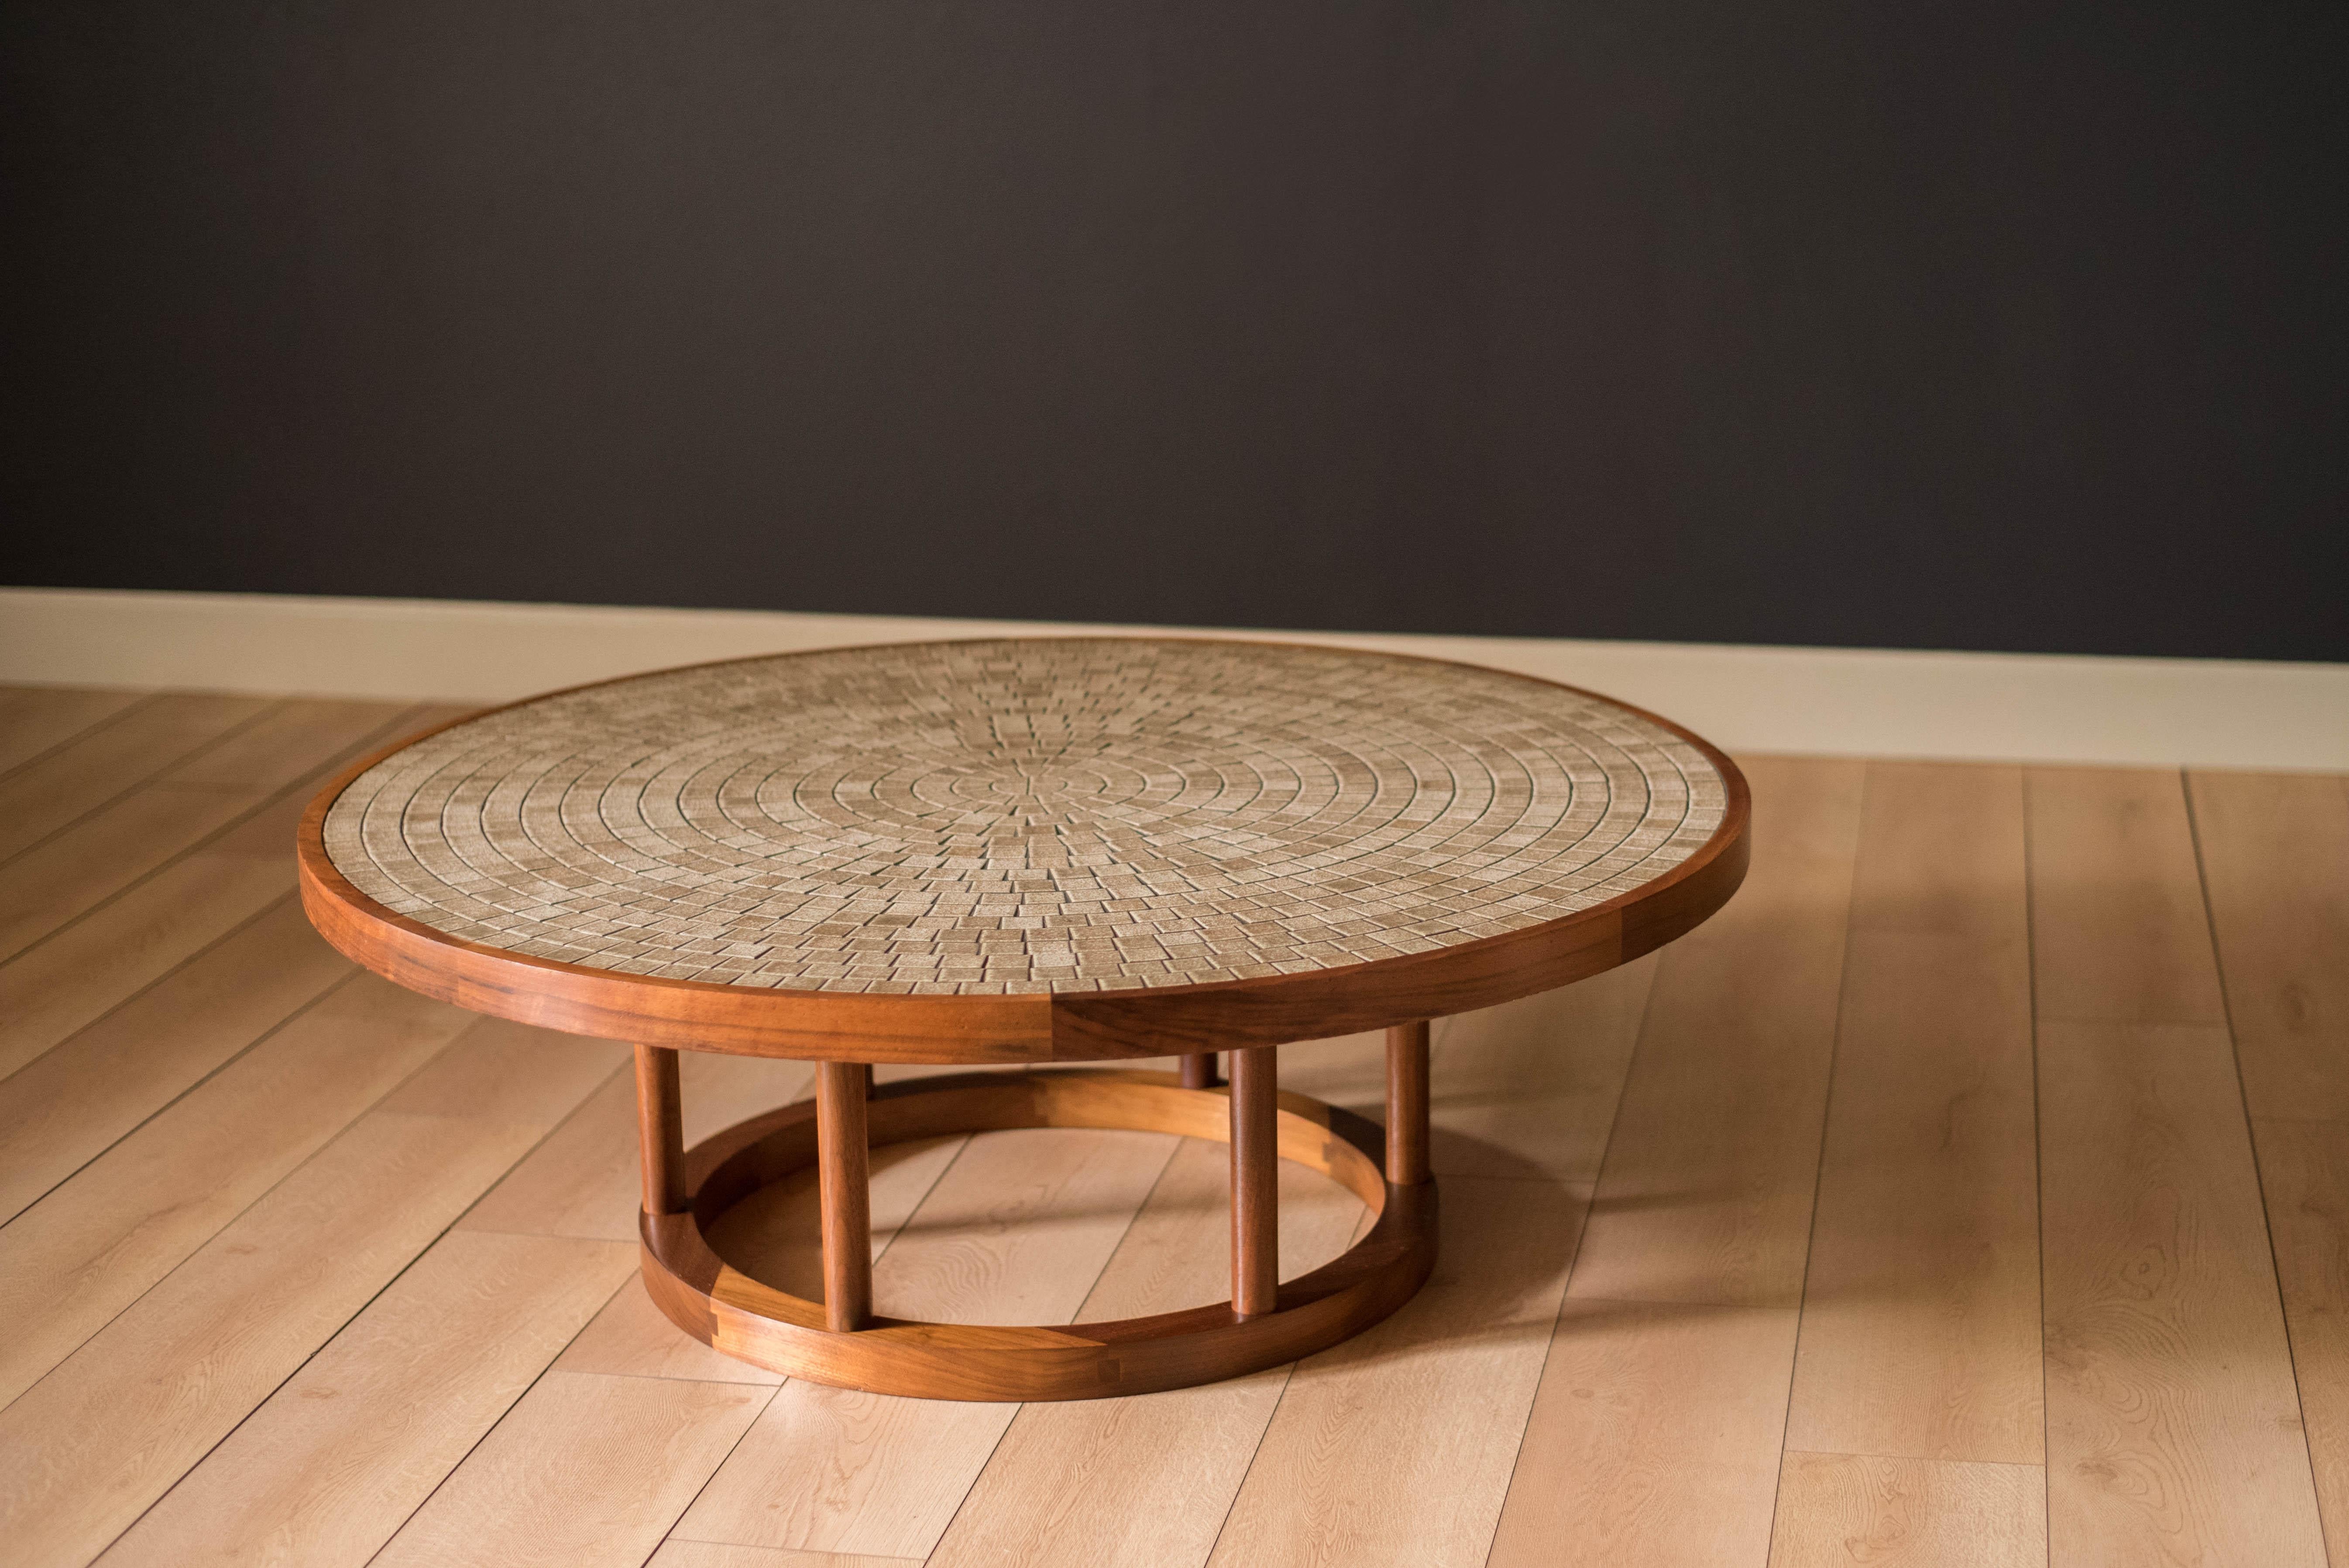 Mid-Century Modern coffee table designed by Jane and Gordon Martz for Marshall Studios. This piece features a round tabletop inlaid with stoneware tile in a textured tan and cream matte finish. Sturdy pedestal ring base is made of black walnut and